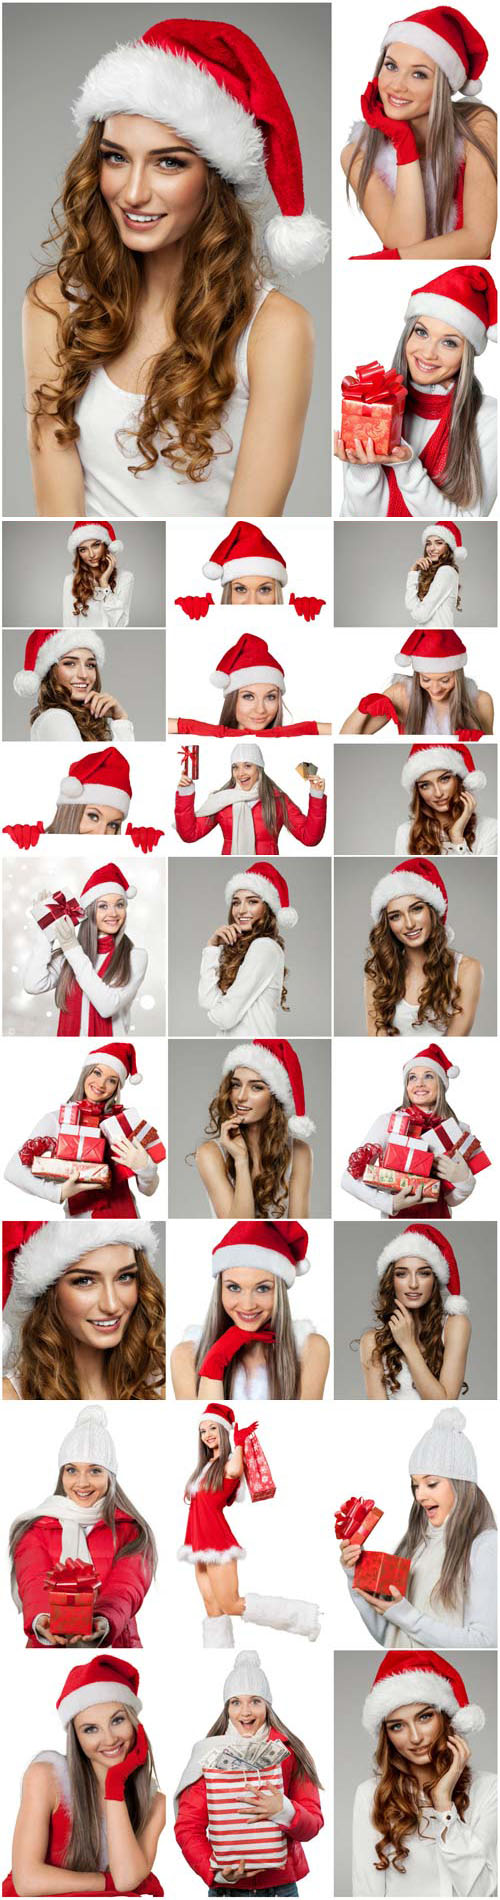 New Year and Christmas stock photos №59